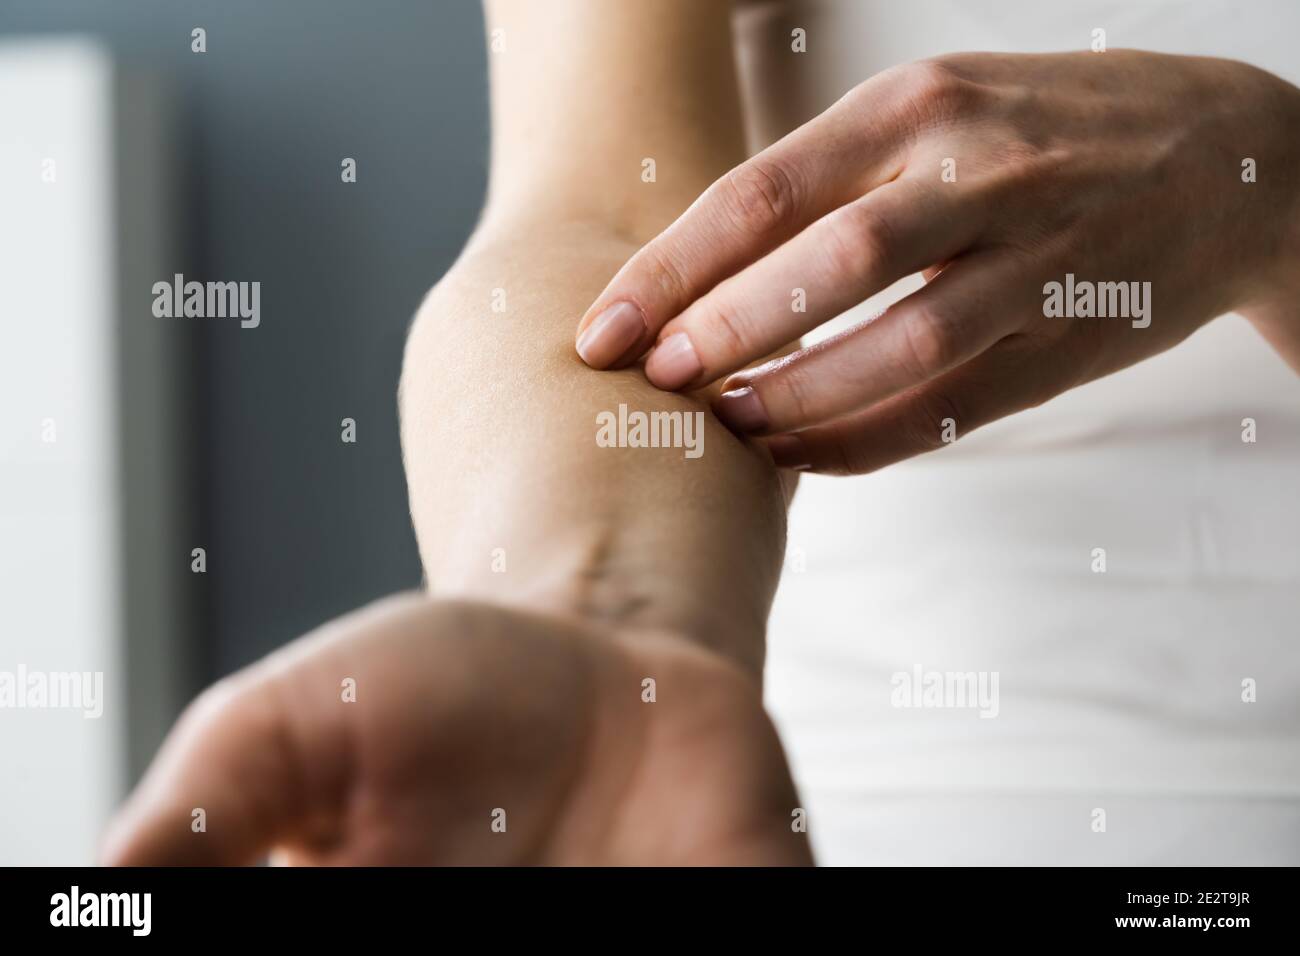 Woman Scratching Itching Body Skin With Allergy Stock Photo